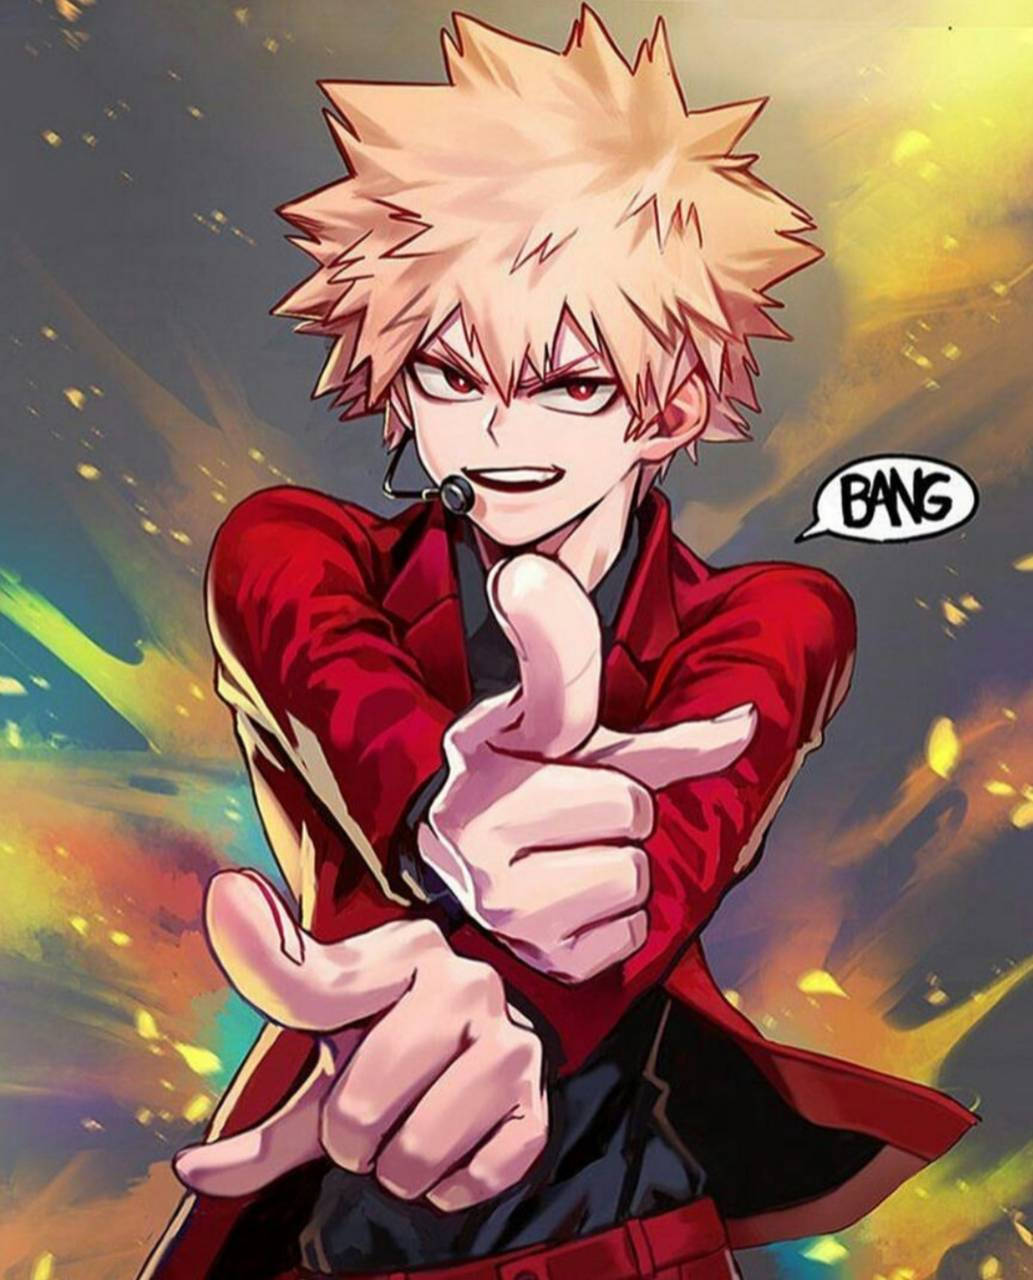 Cute Bakugou In His Signature Outfit Background